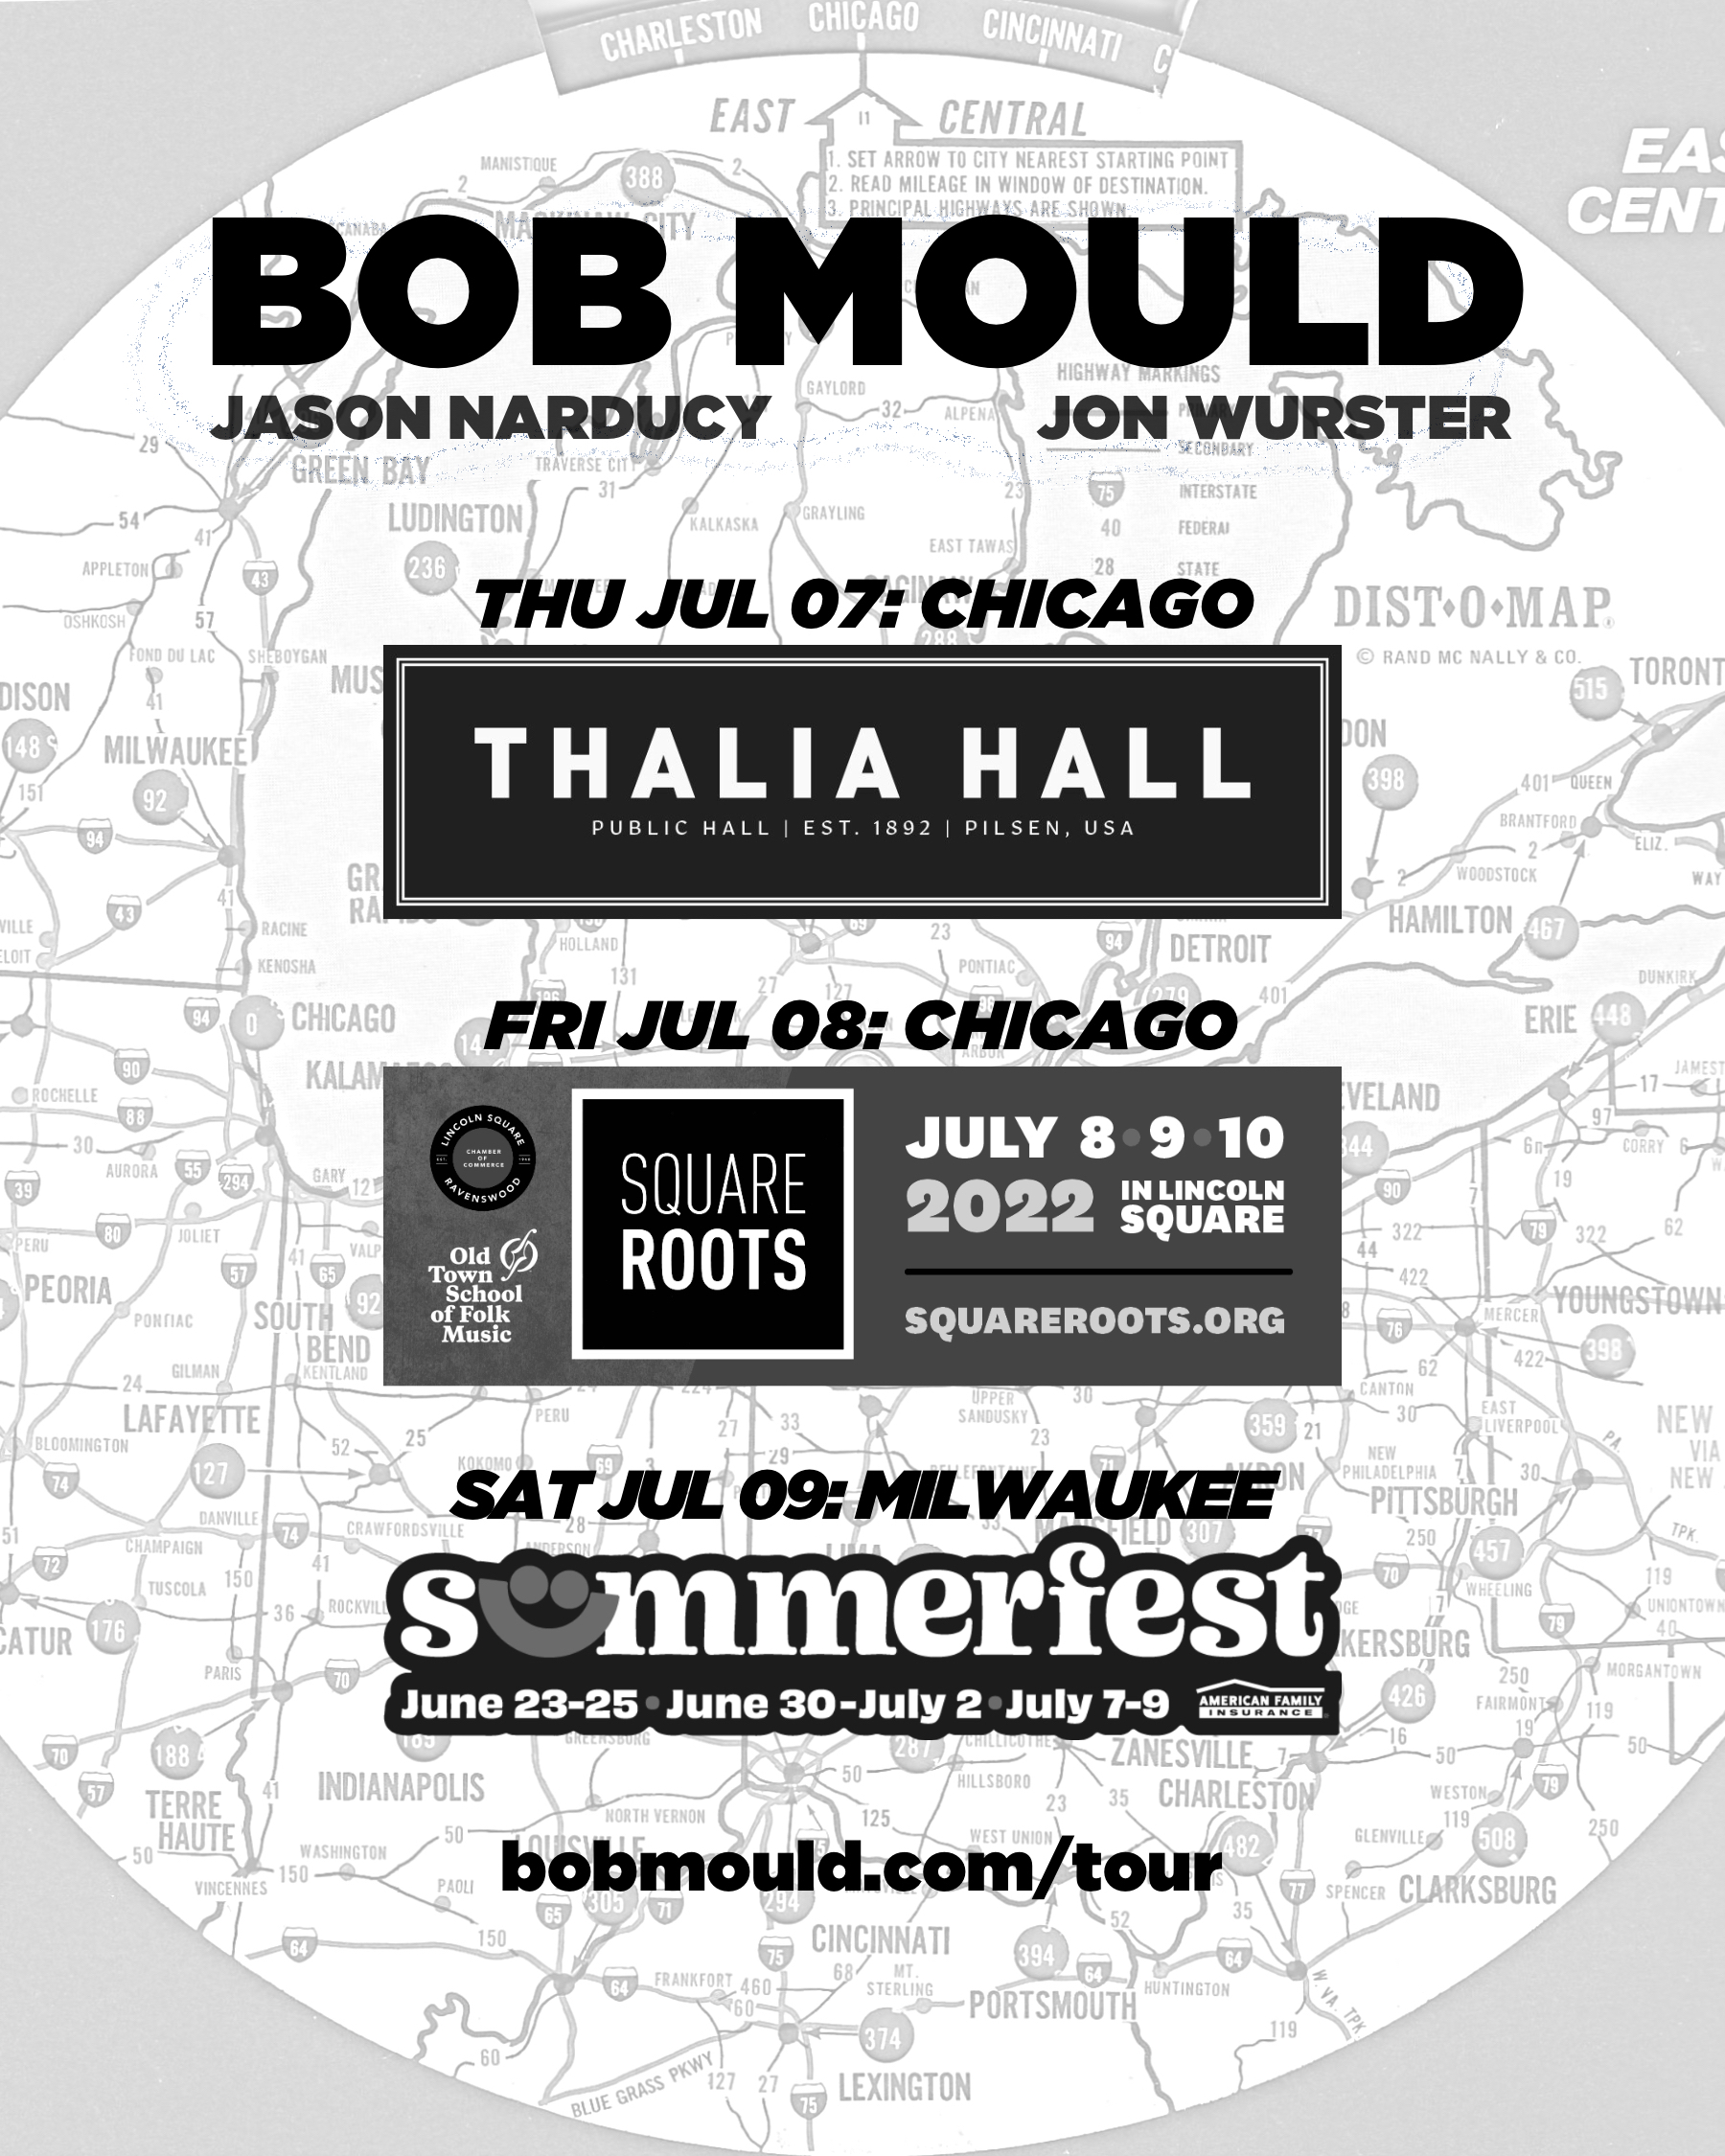 Bob Mould Band is back for three shows in July!